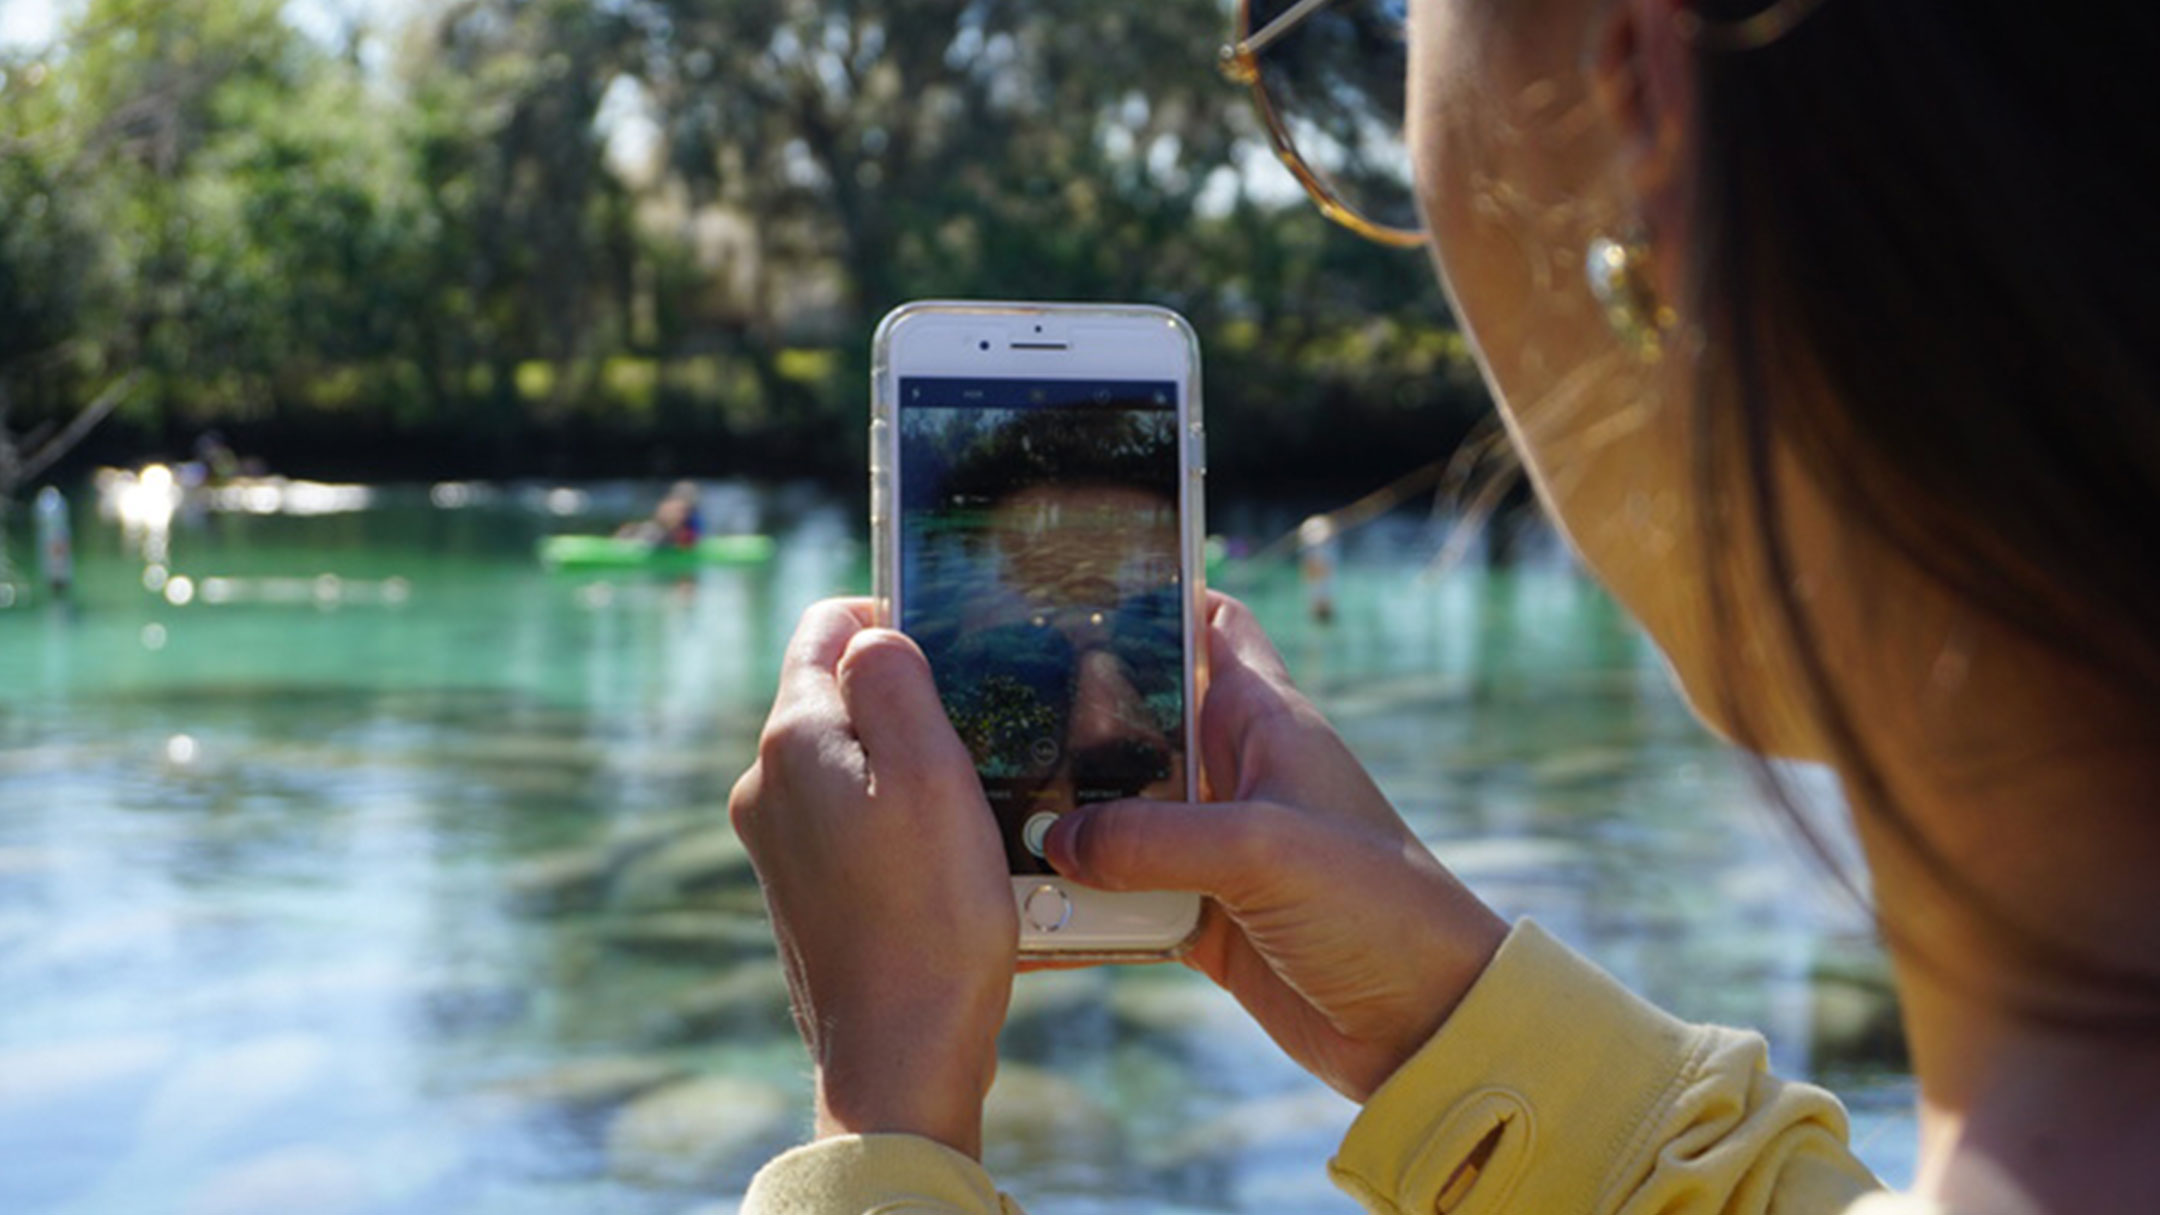 A girl taking a photo of manatees on her iphone.